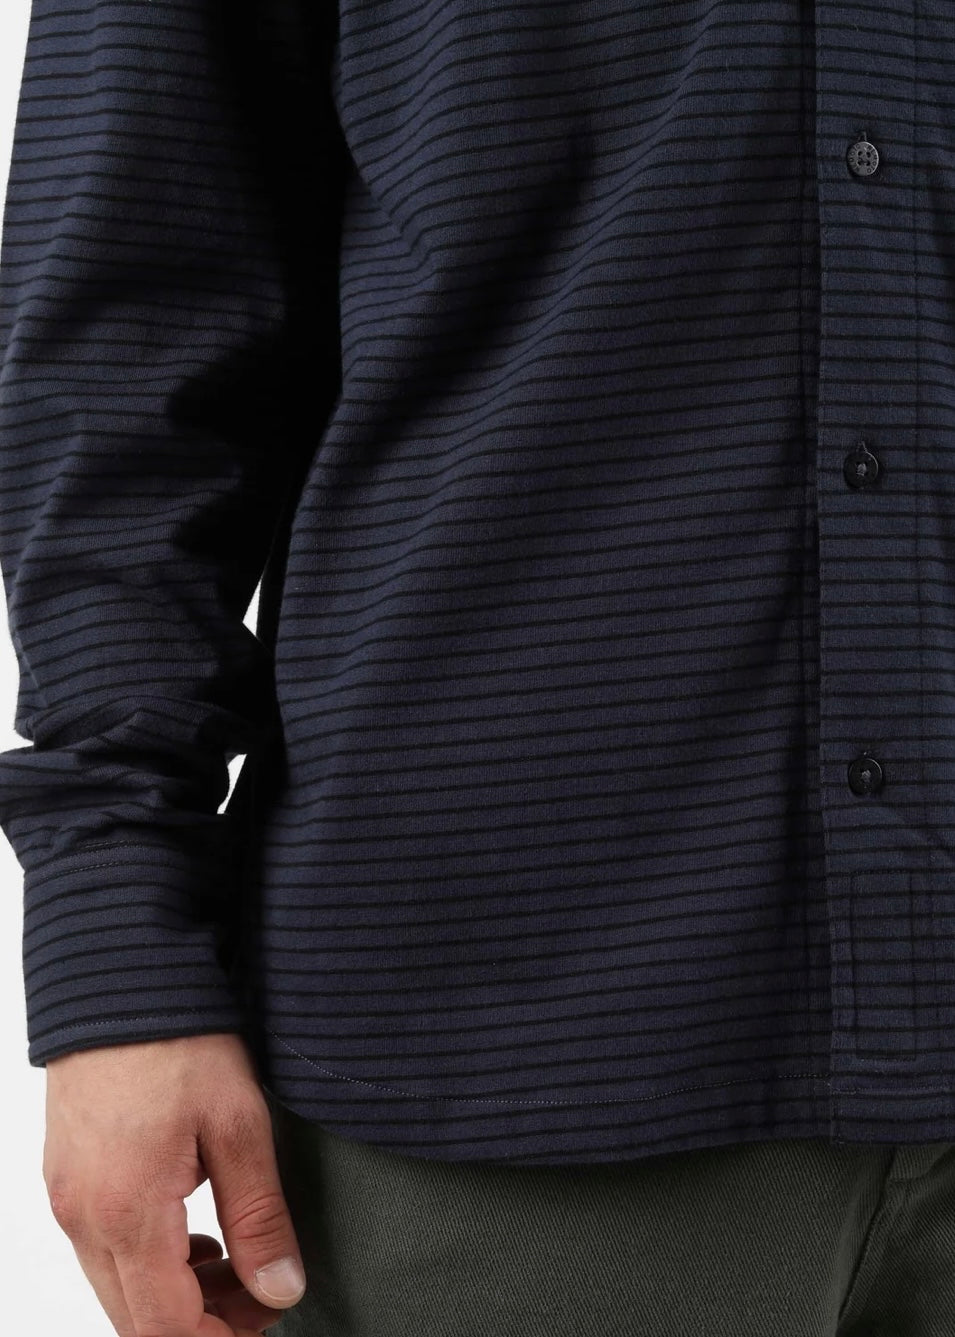 Shaw Navy Blue/Black Button Up